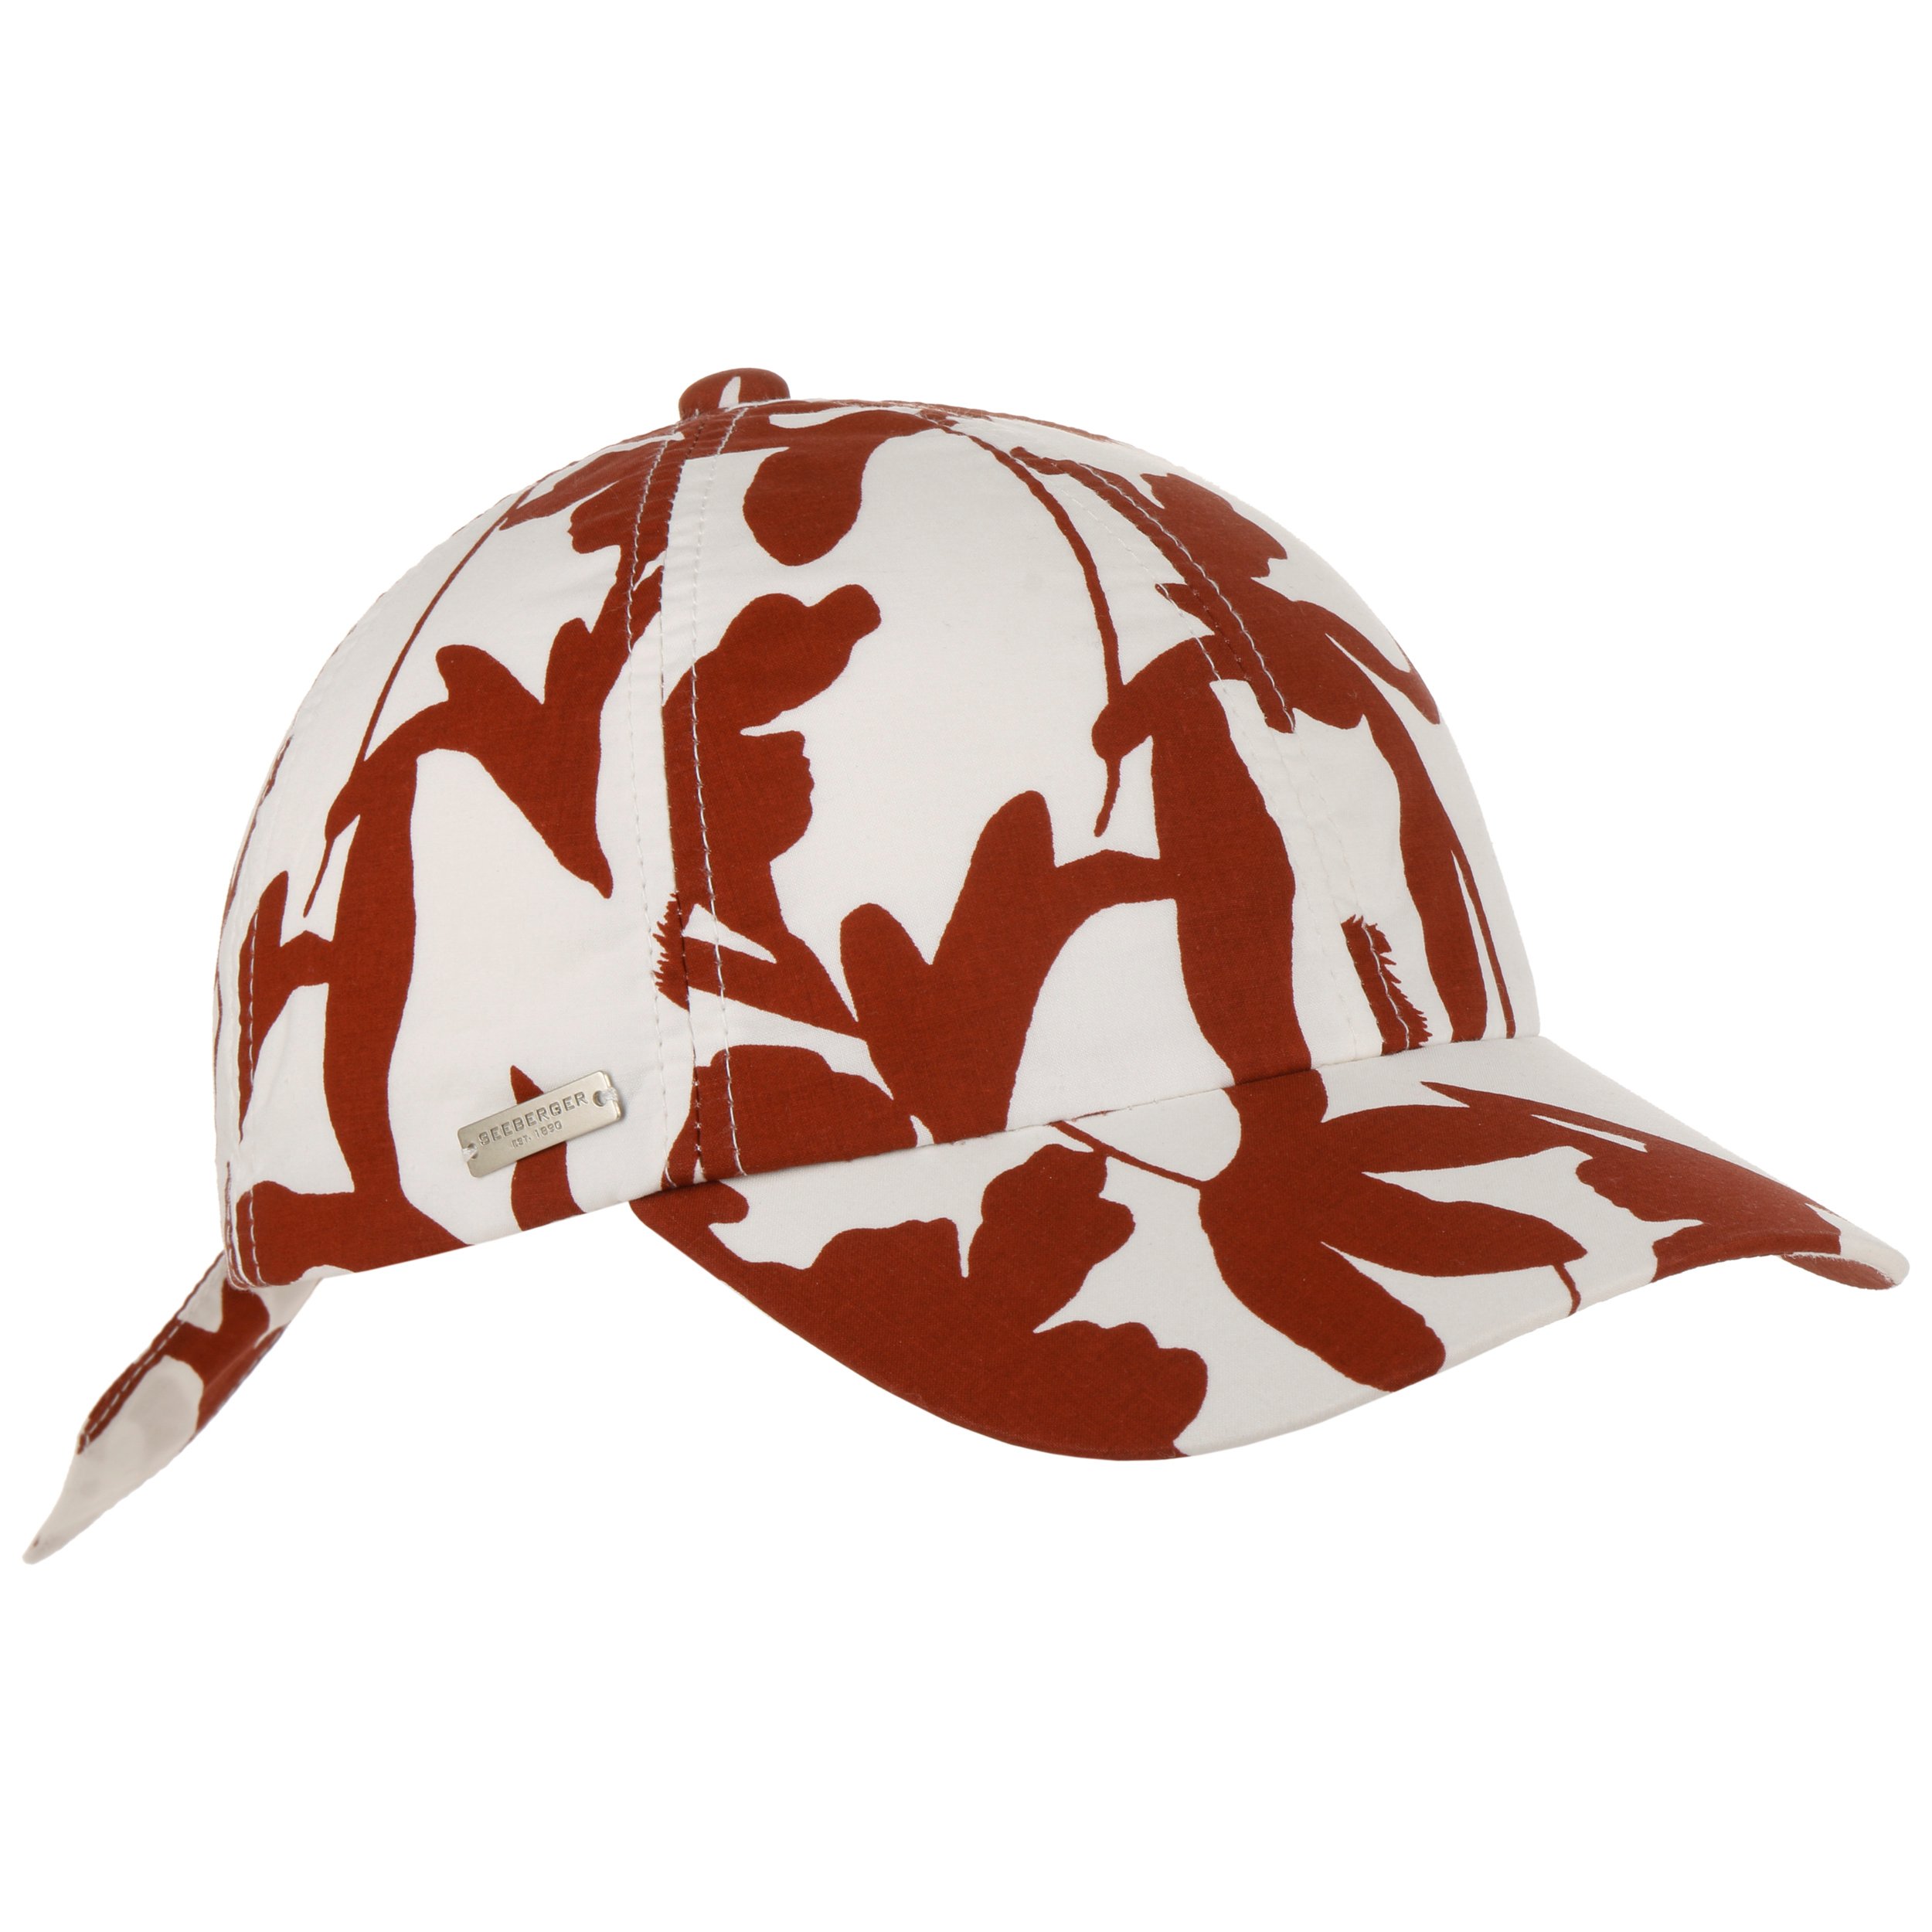 29,95 € Seeberger Flower Cap - by Twotone